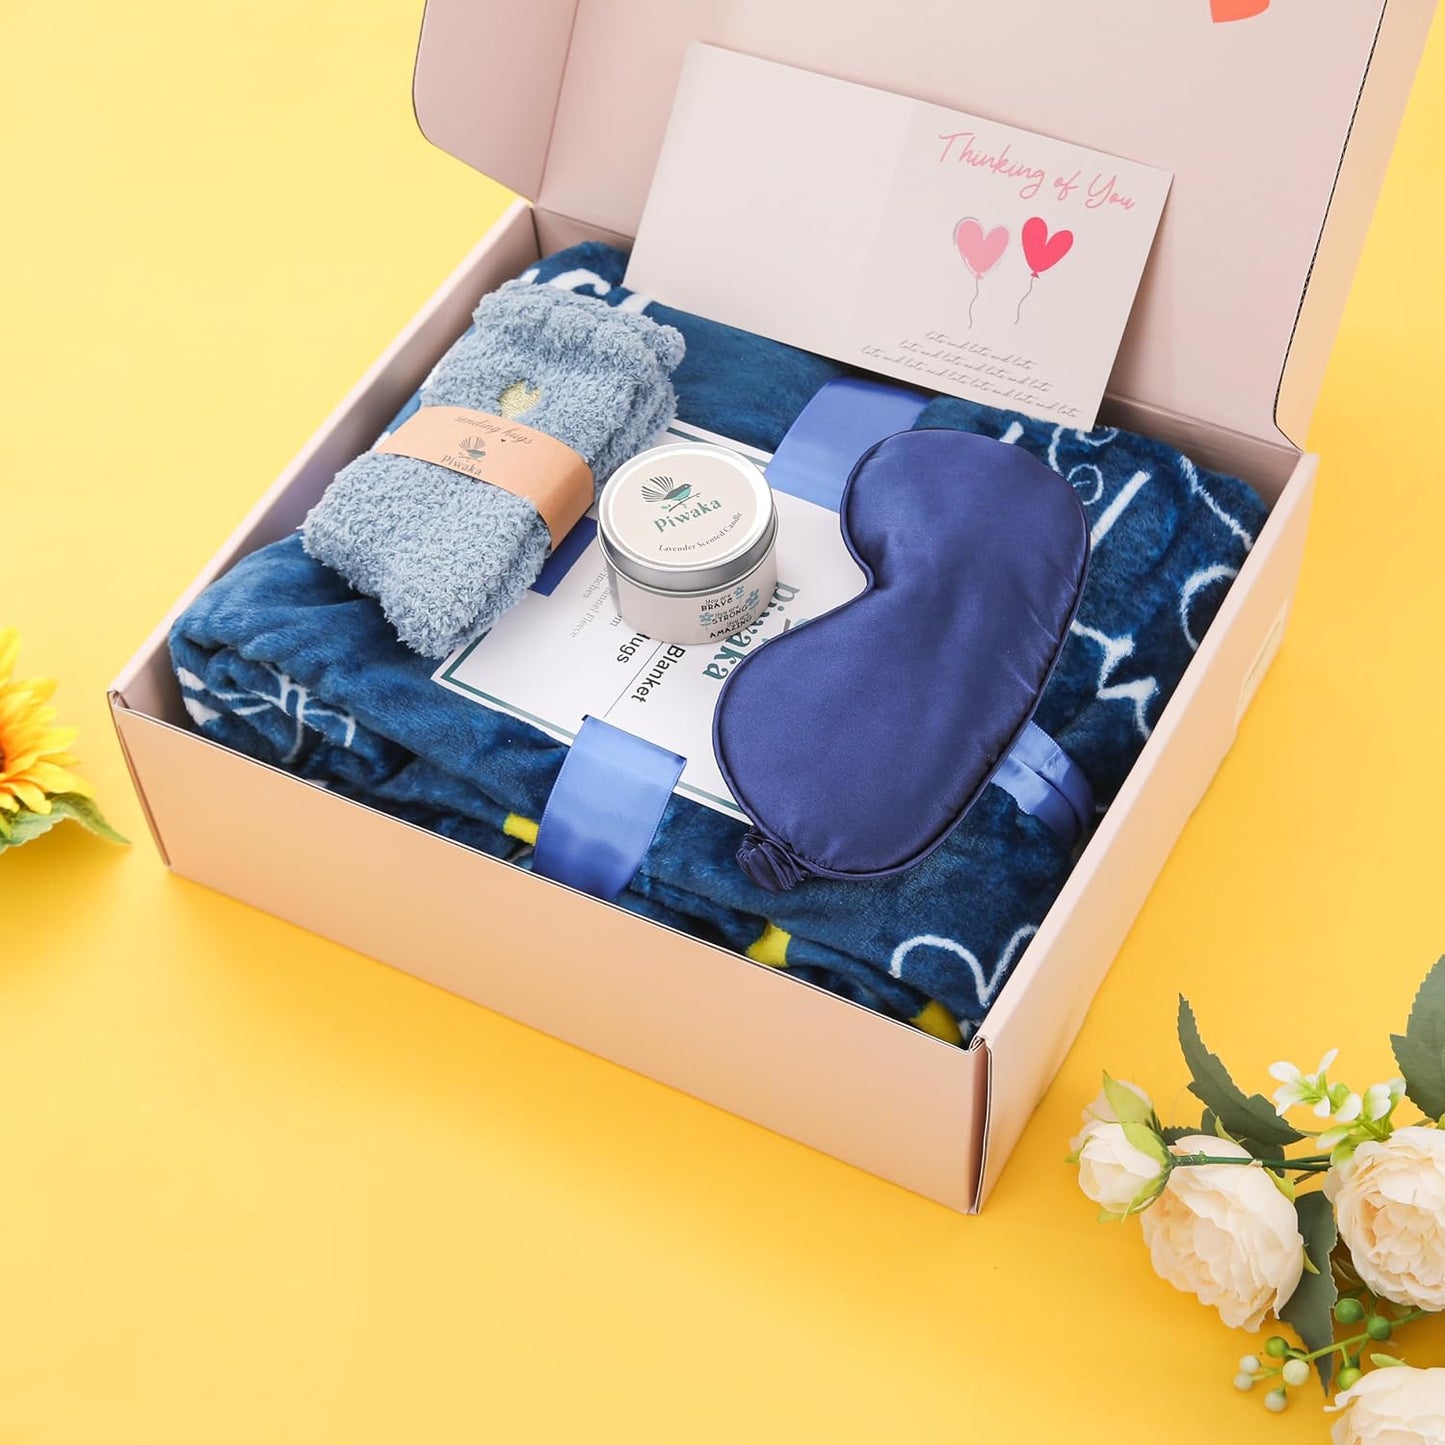 Sending a Hug Gift Box - Relaxing & Inspirational Self Care Basket - Sympathy, Encouragement, and Get Well Soon Gift for Women, Thoughtful Care Package for Her